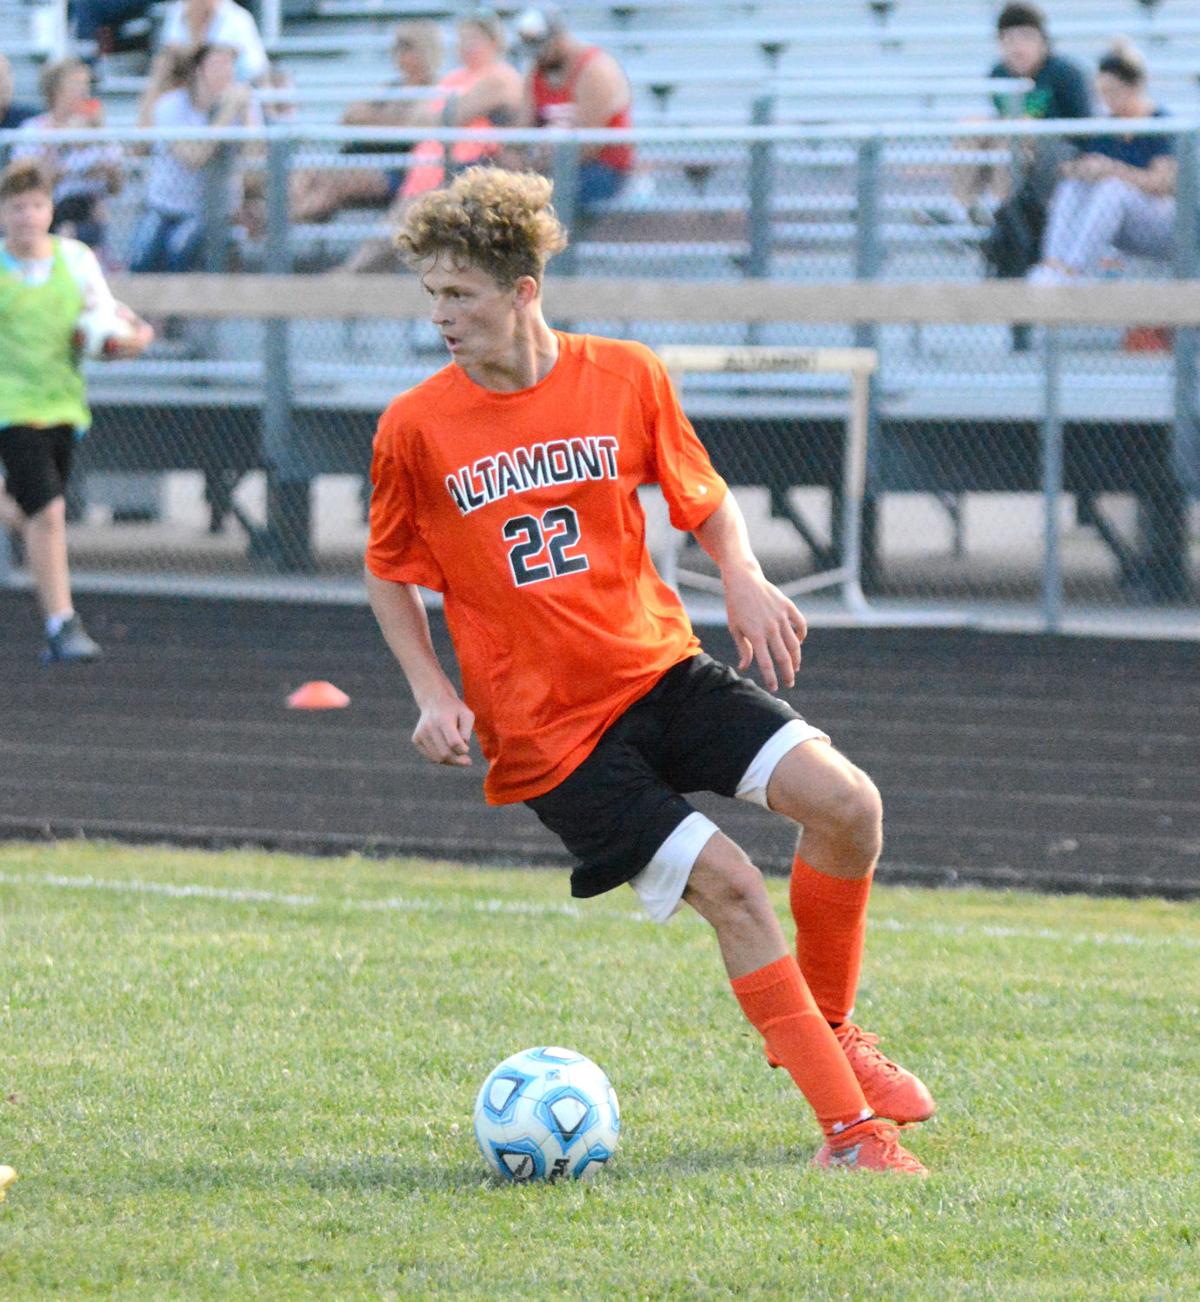 Bannick's hat trick lifts Shoes past Indians | Local Sports ...